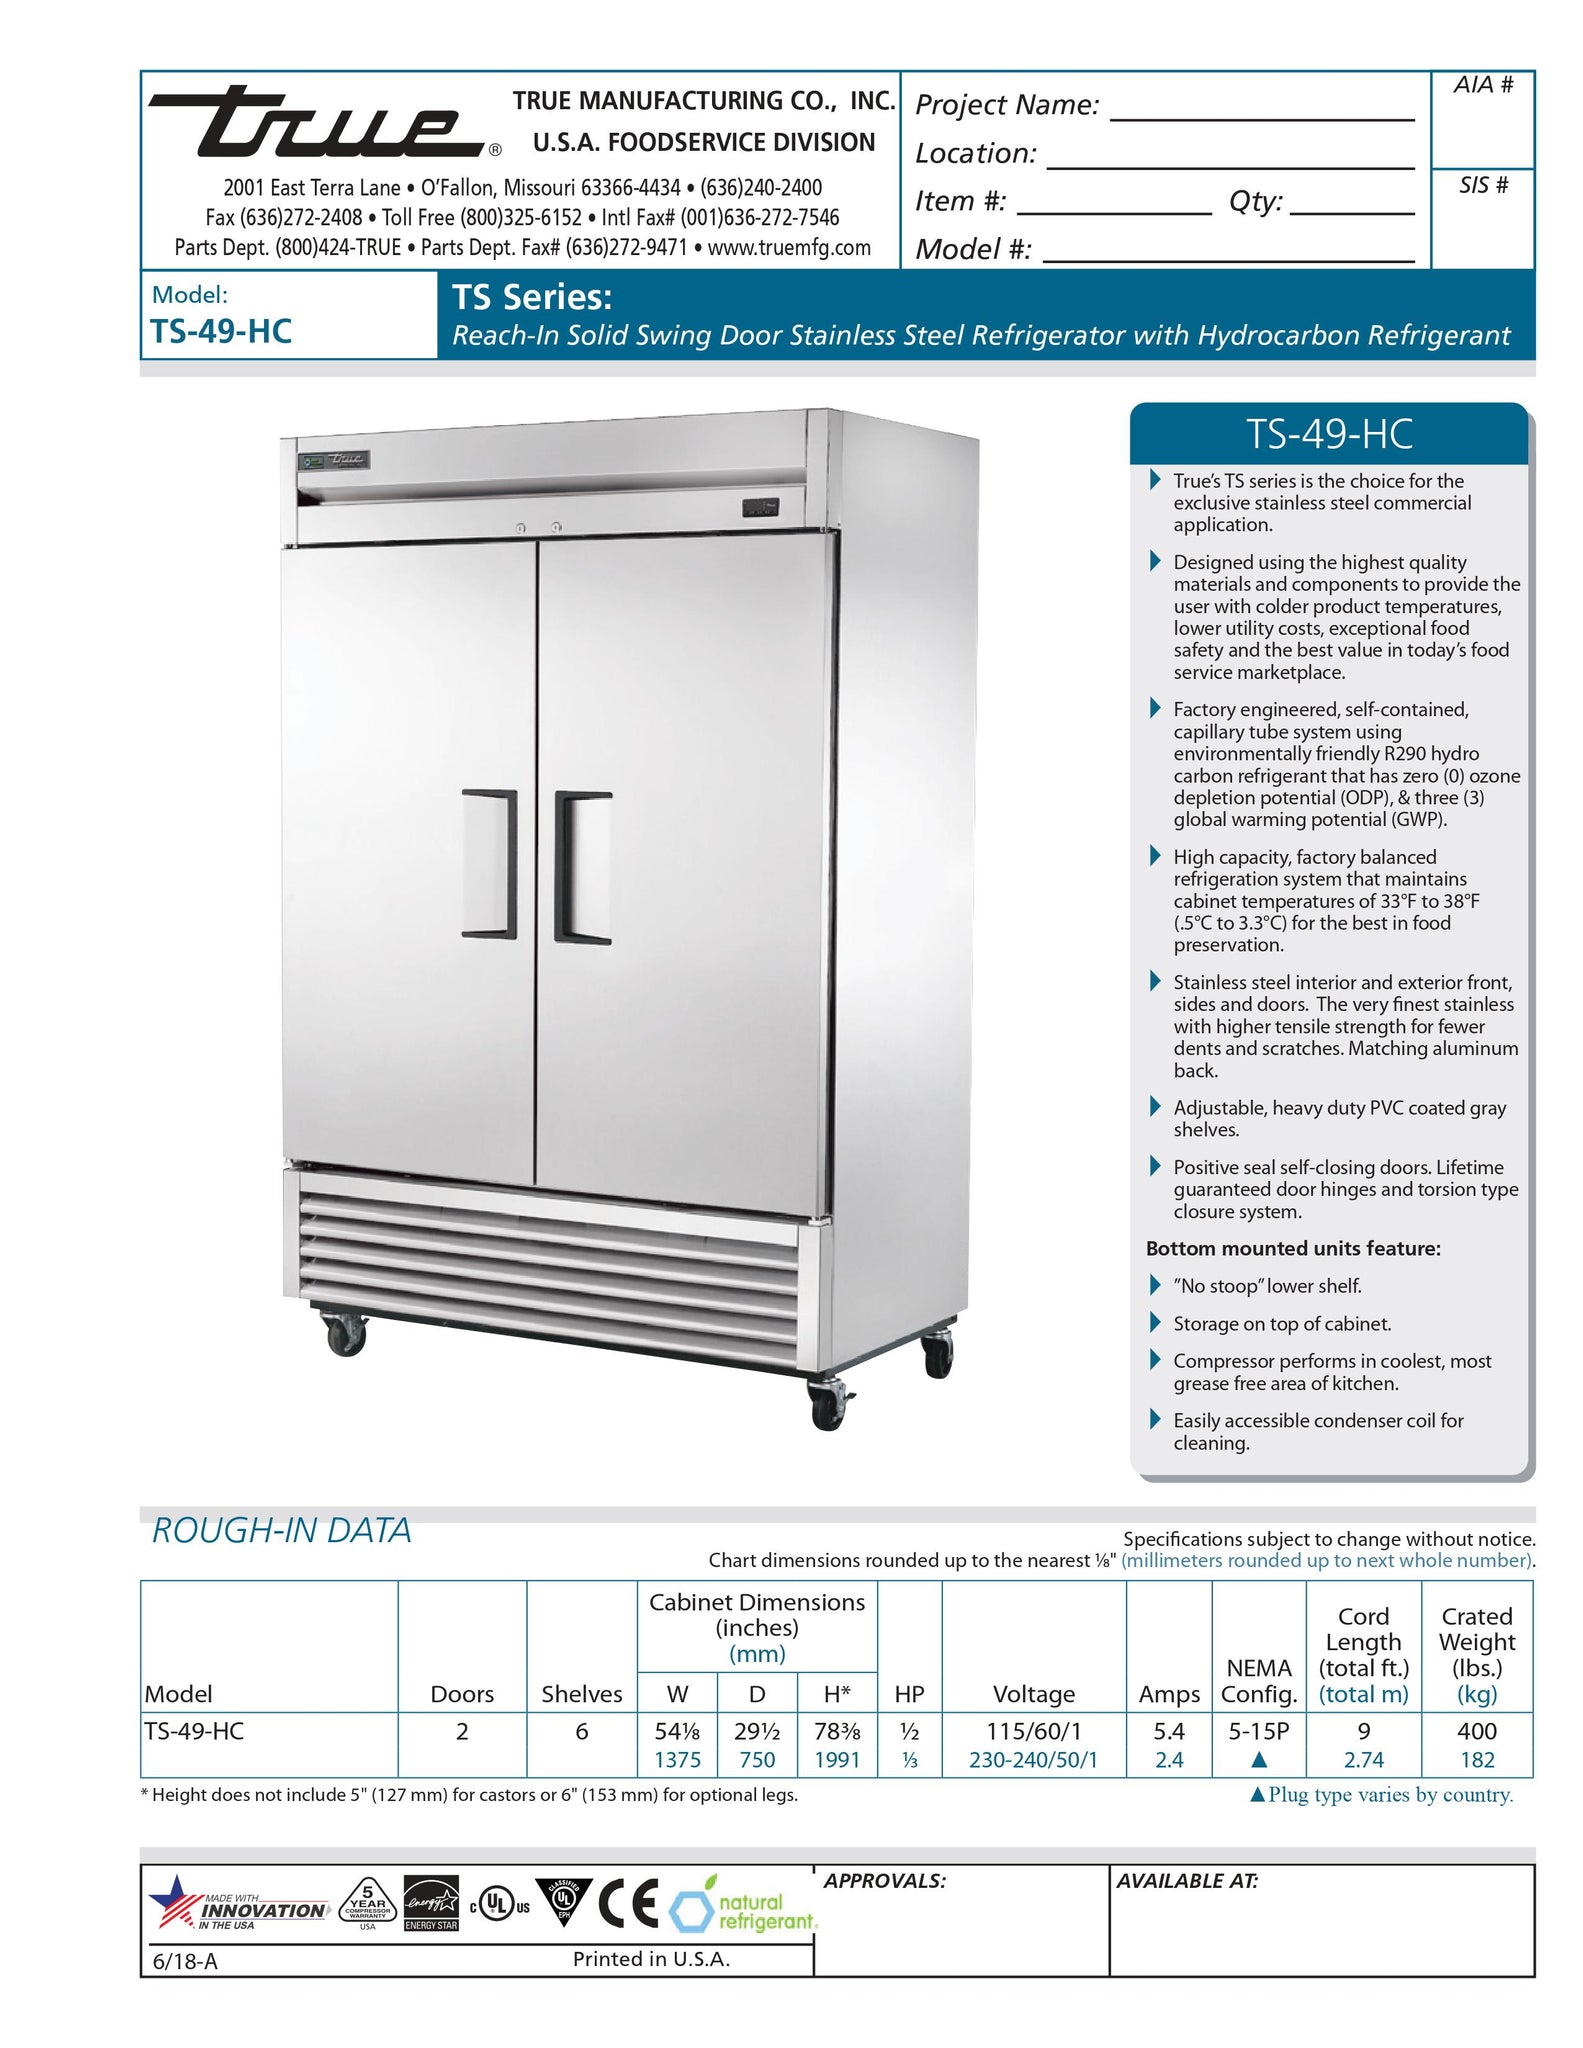 True TS-49-HC 54" Two Section Solid Door Reach-In Refrigerator